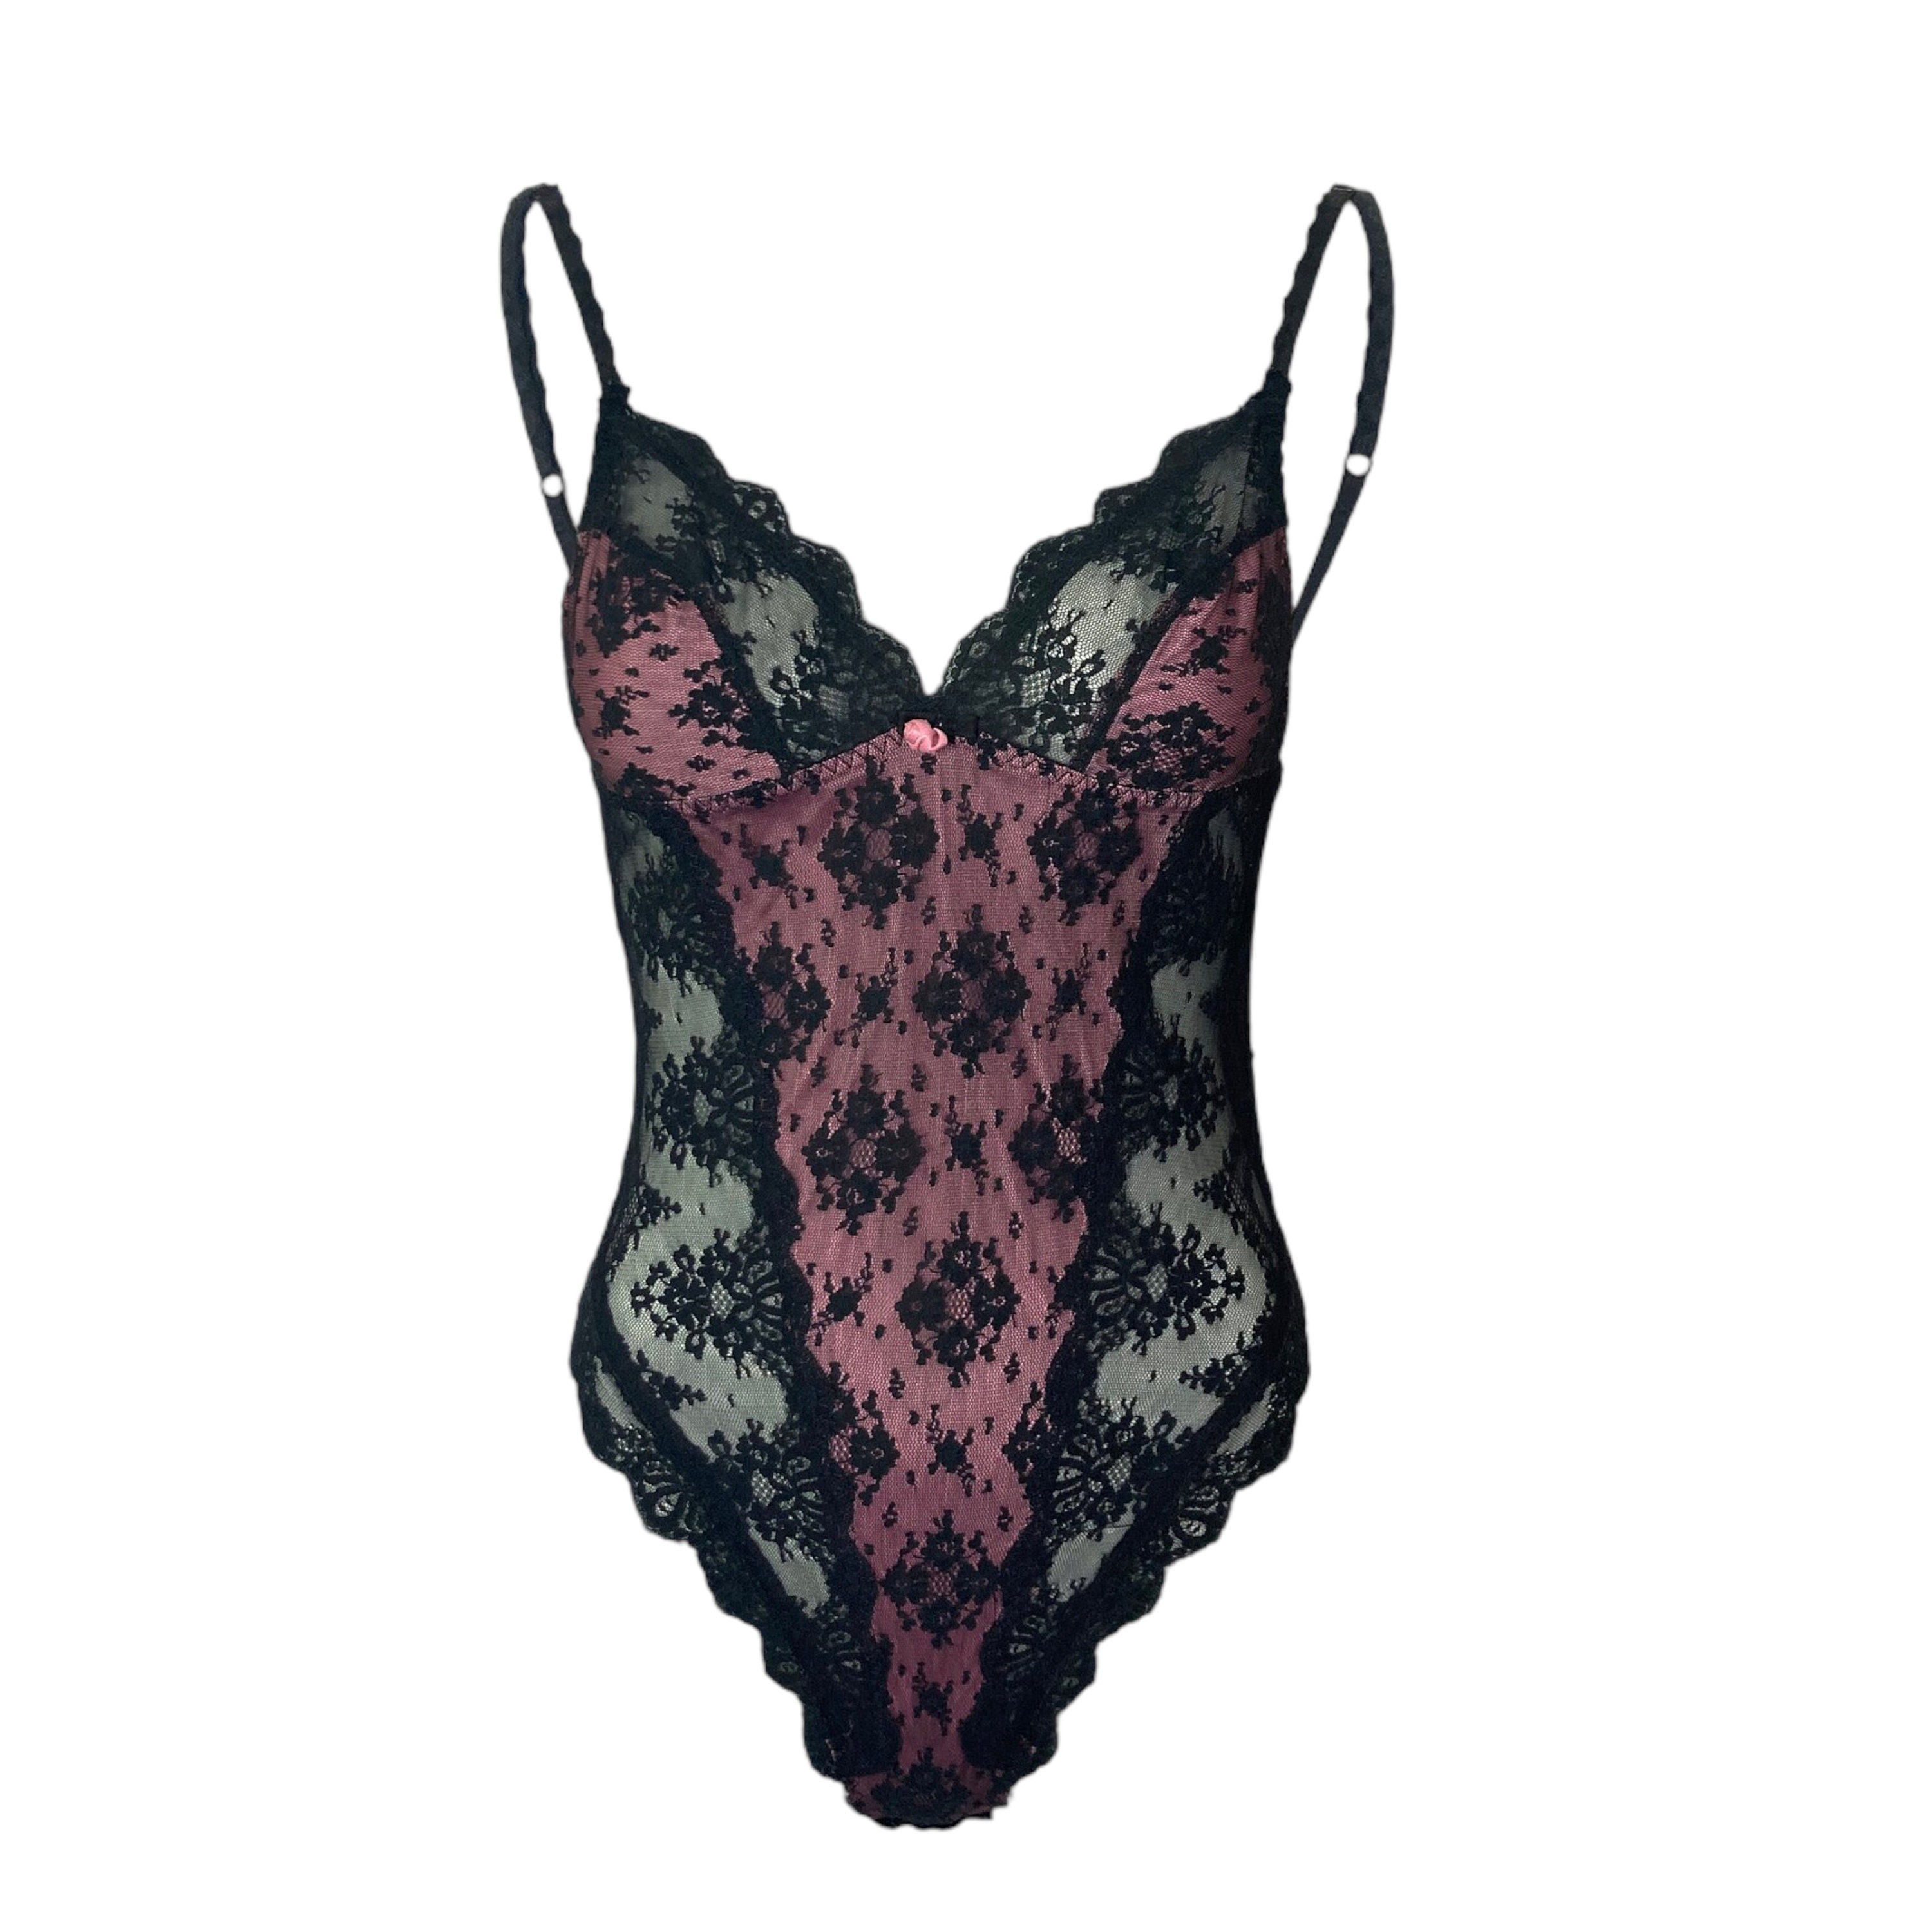 Buy Lace Teddy Bodysuit Online In India -  India